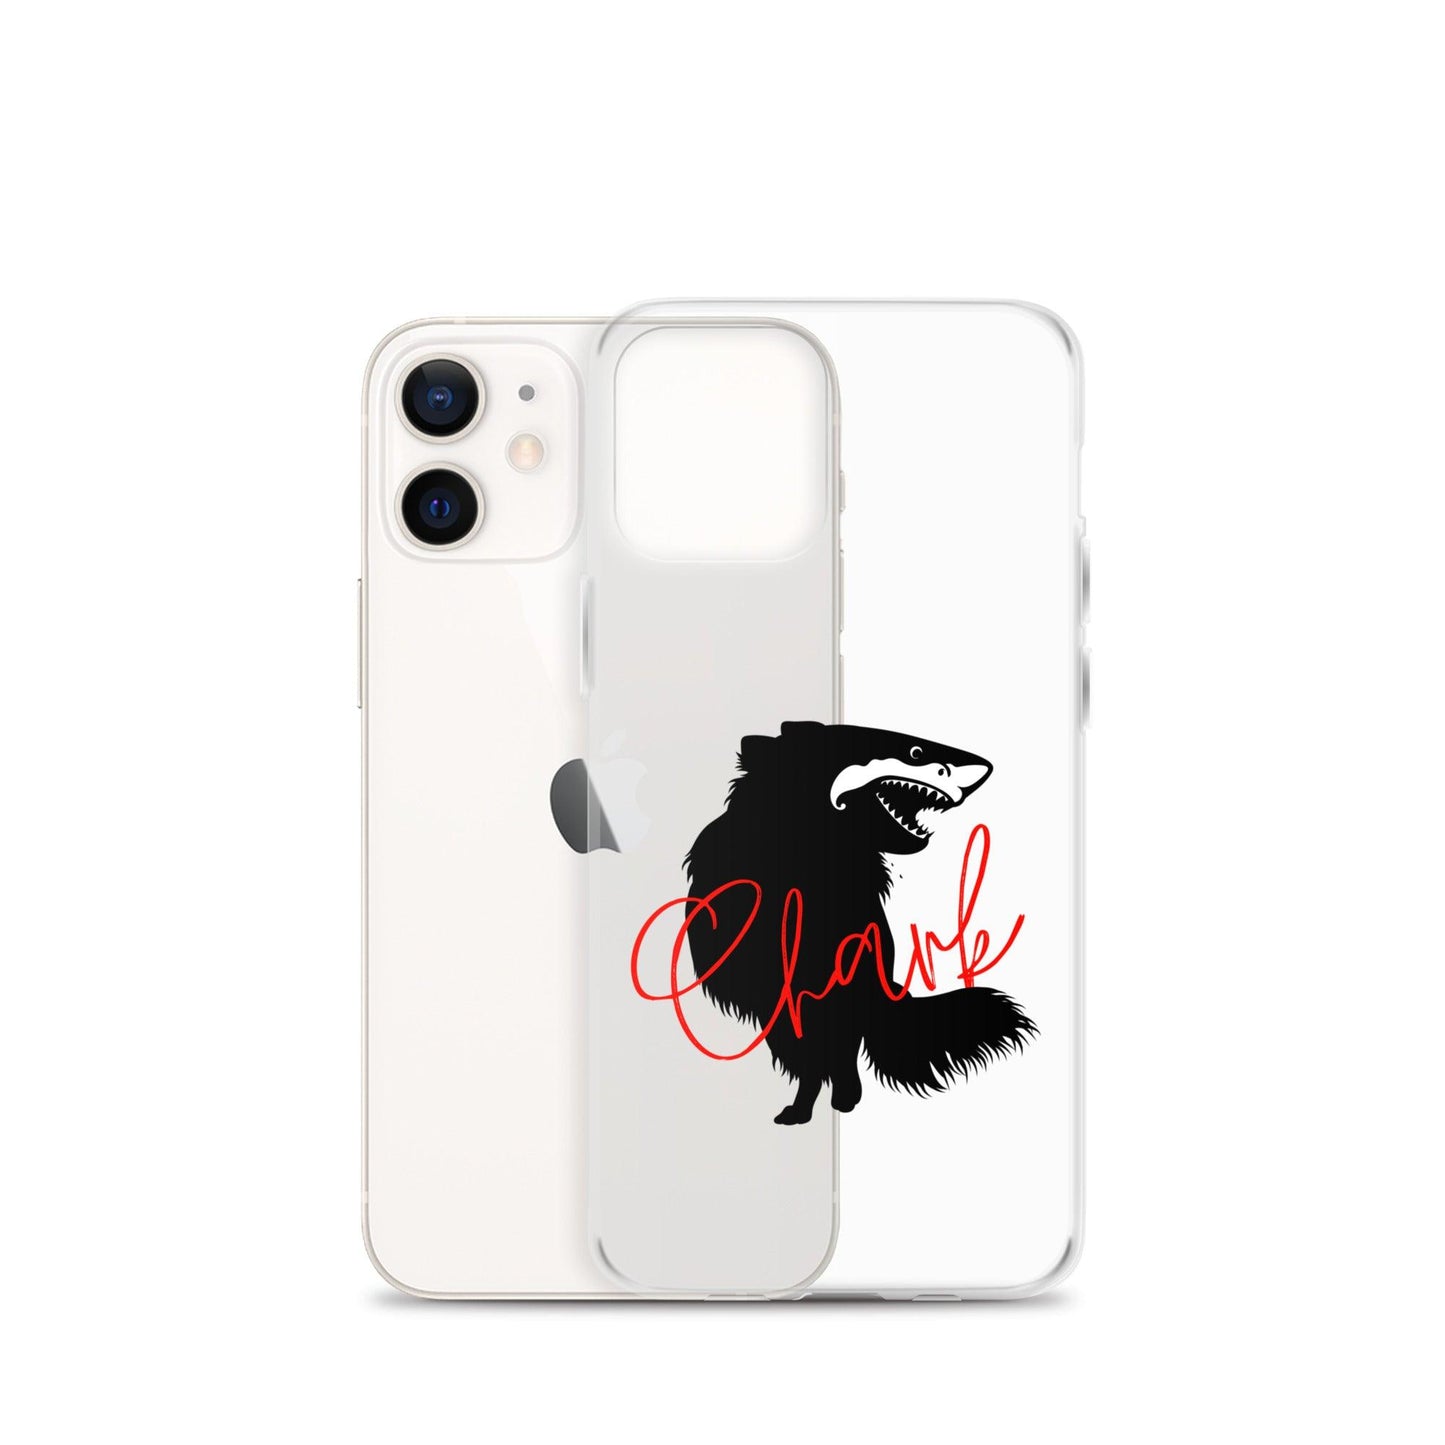 Chihuahua + Shark = Chark Clear iPhone case with the black silhouette of a longhaired chihuahua with the face of a great white shark - mouth open to show off jaws lined with lots of sharp white teeth. The word "Chark" is artfully placed in red cursive font over the image. For trendy chi lovers. iPhone 12 mini case.